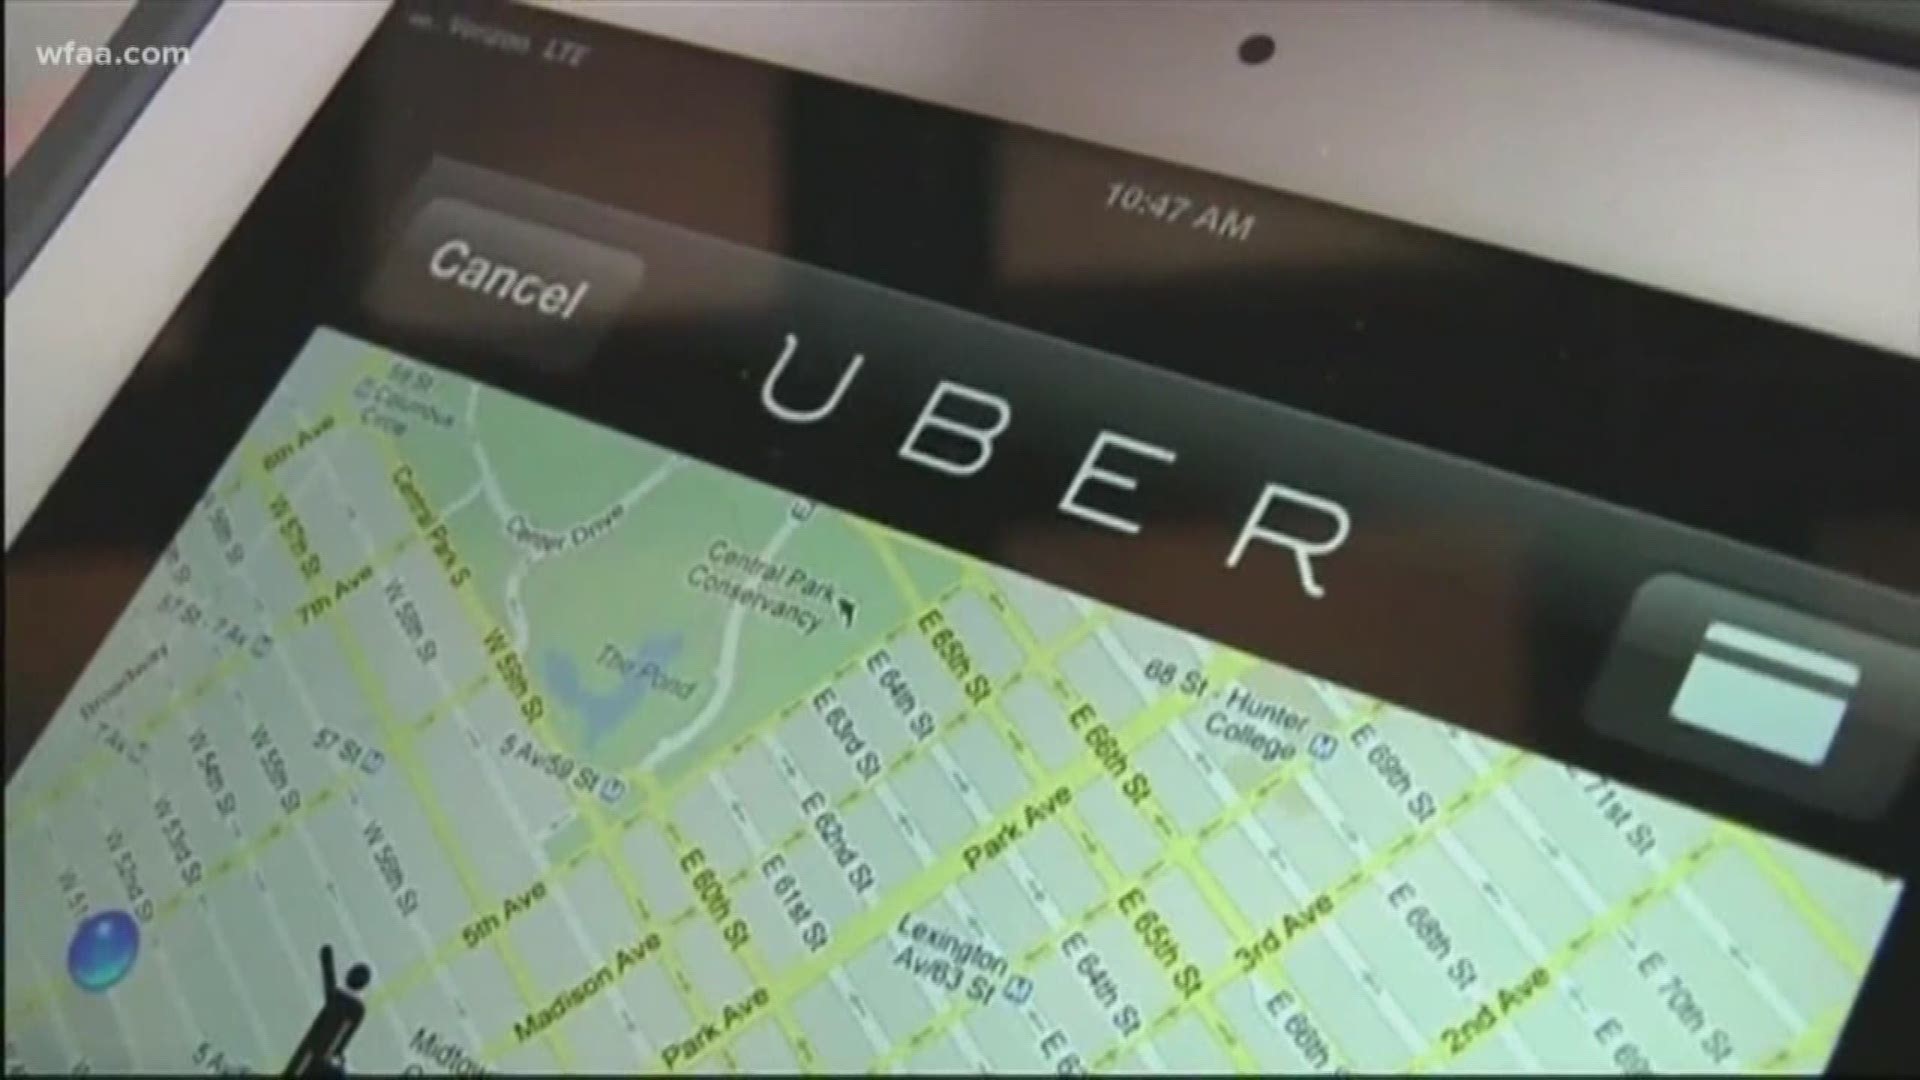 Uber released a safety report that states there were 3,045 sexual assaults during rides in the U.S. last year. "To me, one fraction is way too many," Laci Hay said.